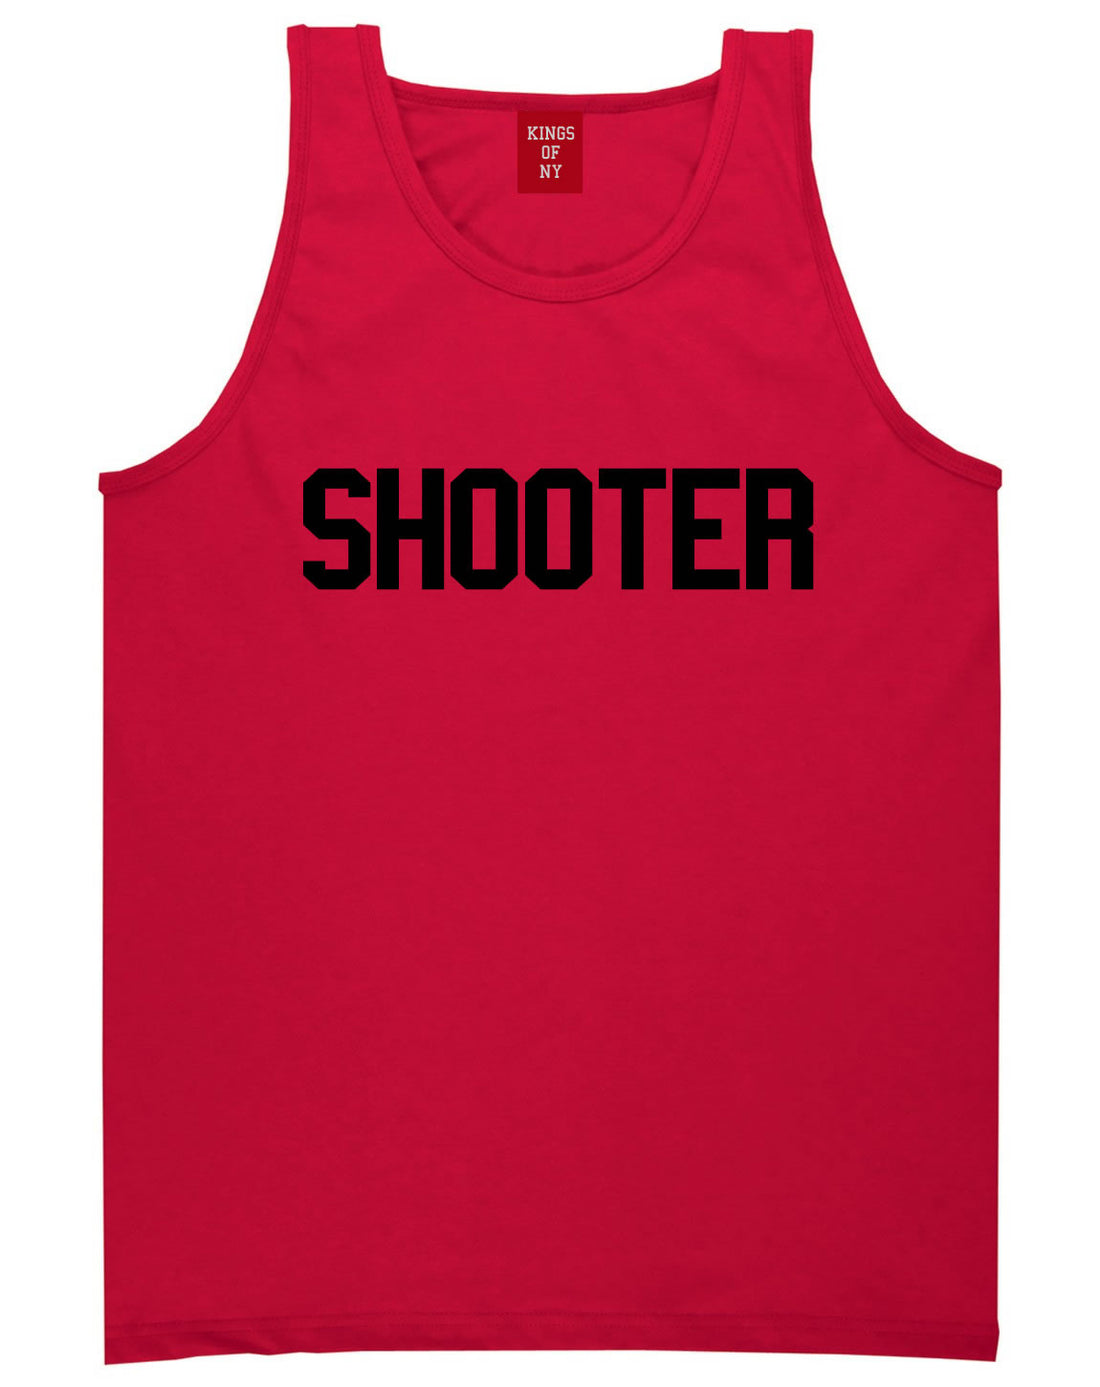 Shooter Tank Top by Kings Of NY